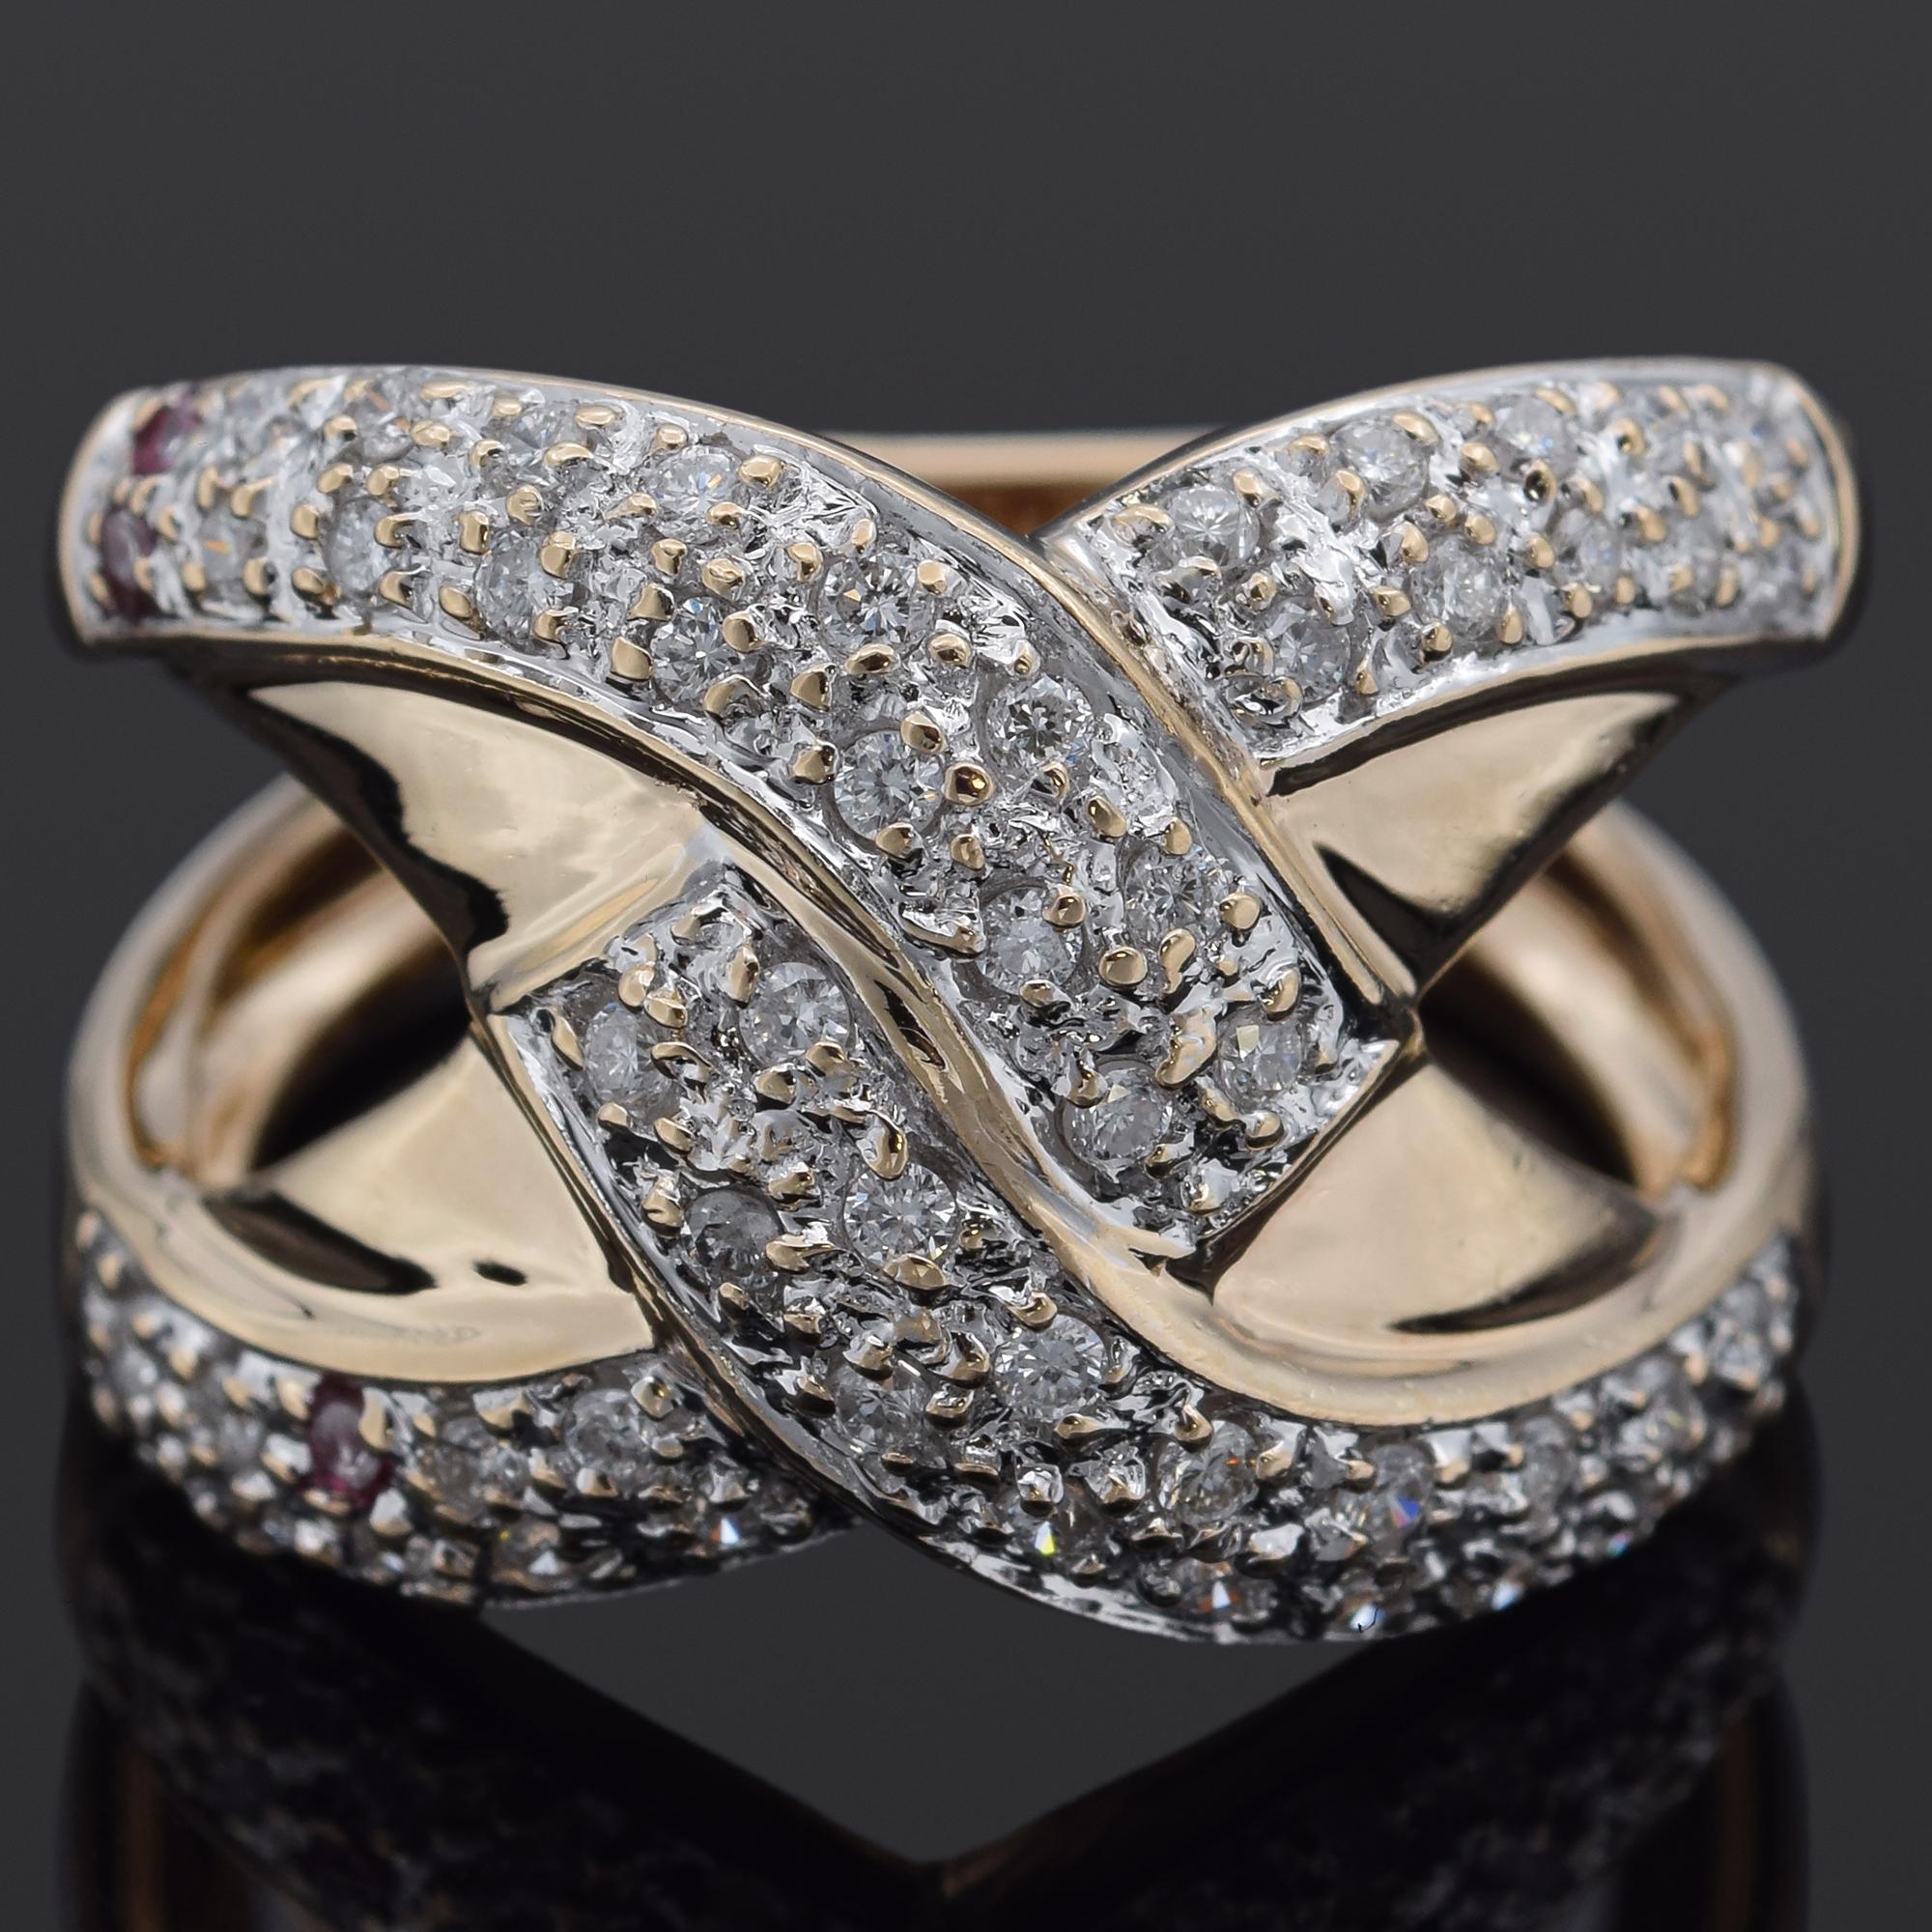 Weight: 10.3 Grams
Stone: Approx 0.81 TCW (0.015 ct) Diamonds 
Face of Ring: 23.0 x 15.6 x 5.7 mm
Ring Size: 7.25
Hallmark: 14K

Item #: BR-1069-101123-10